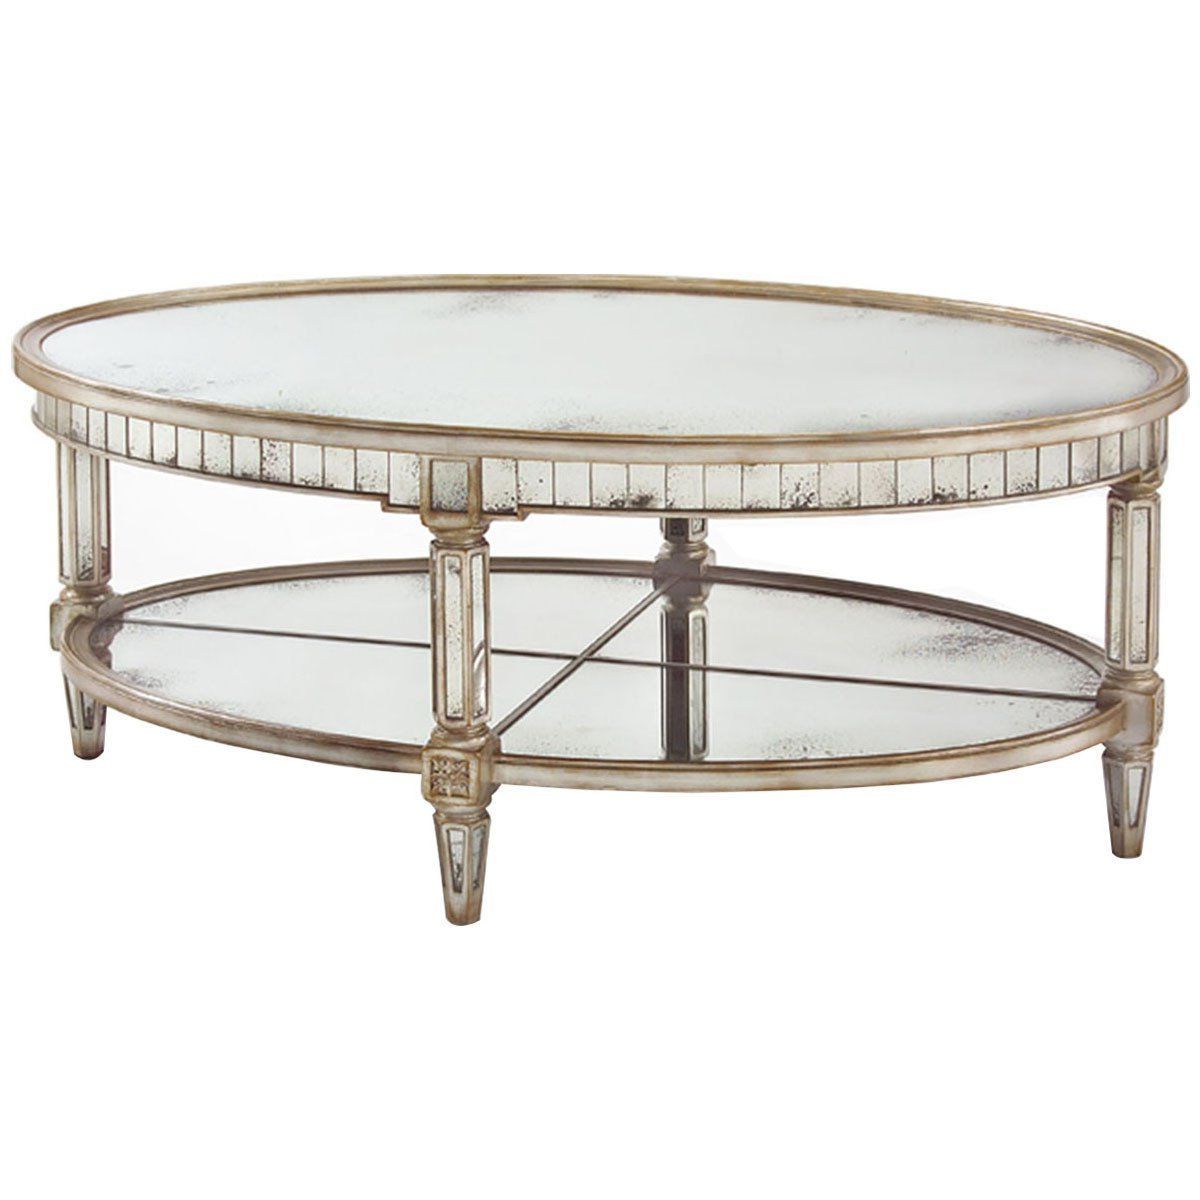 John Richard Parisian Silver Keswick Oval Cocktail Table Throughout Best And Newest Silver Mirror And Chrome Coffee Tables (Gallery 19 of 20)